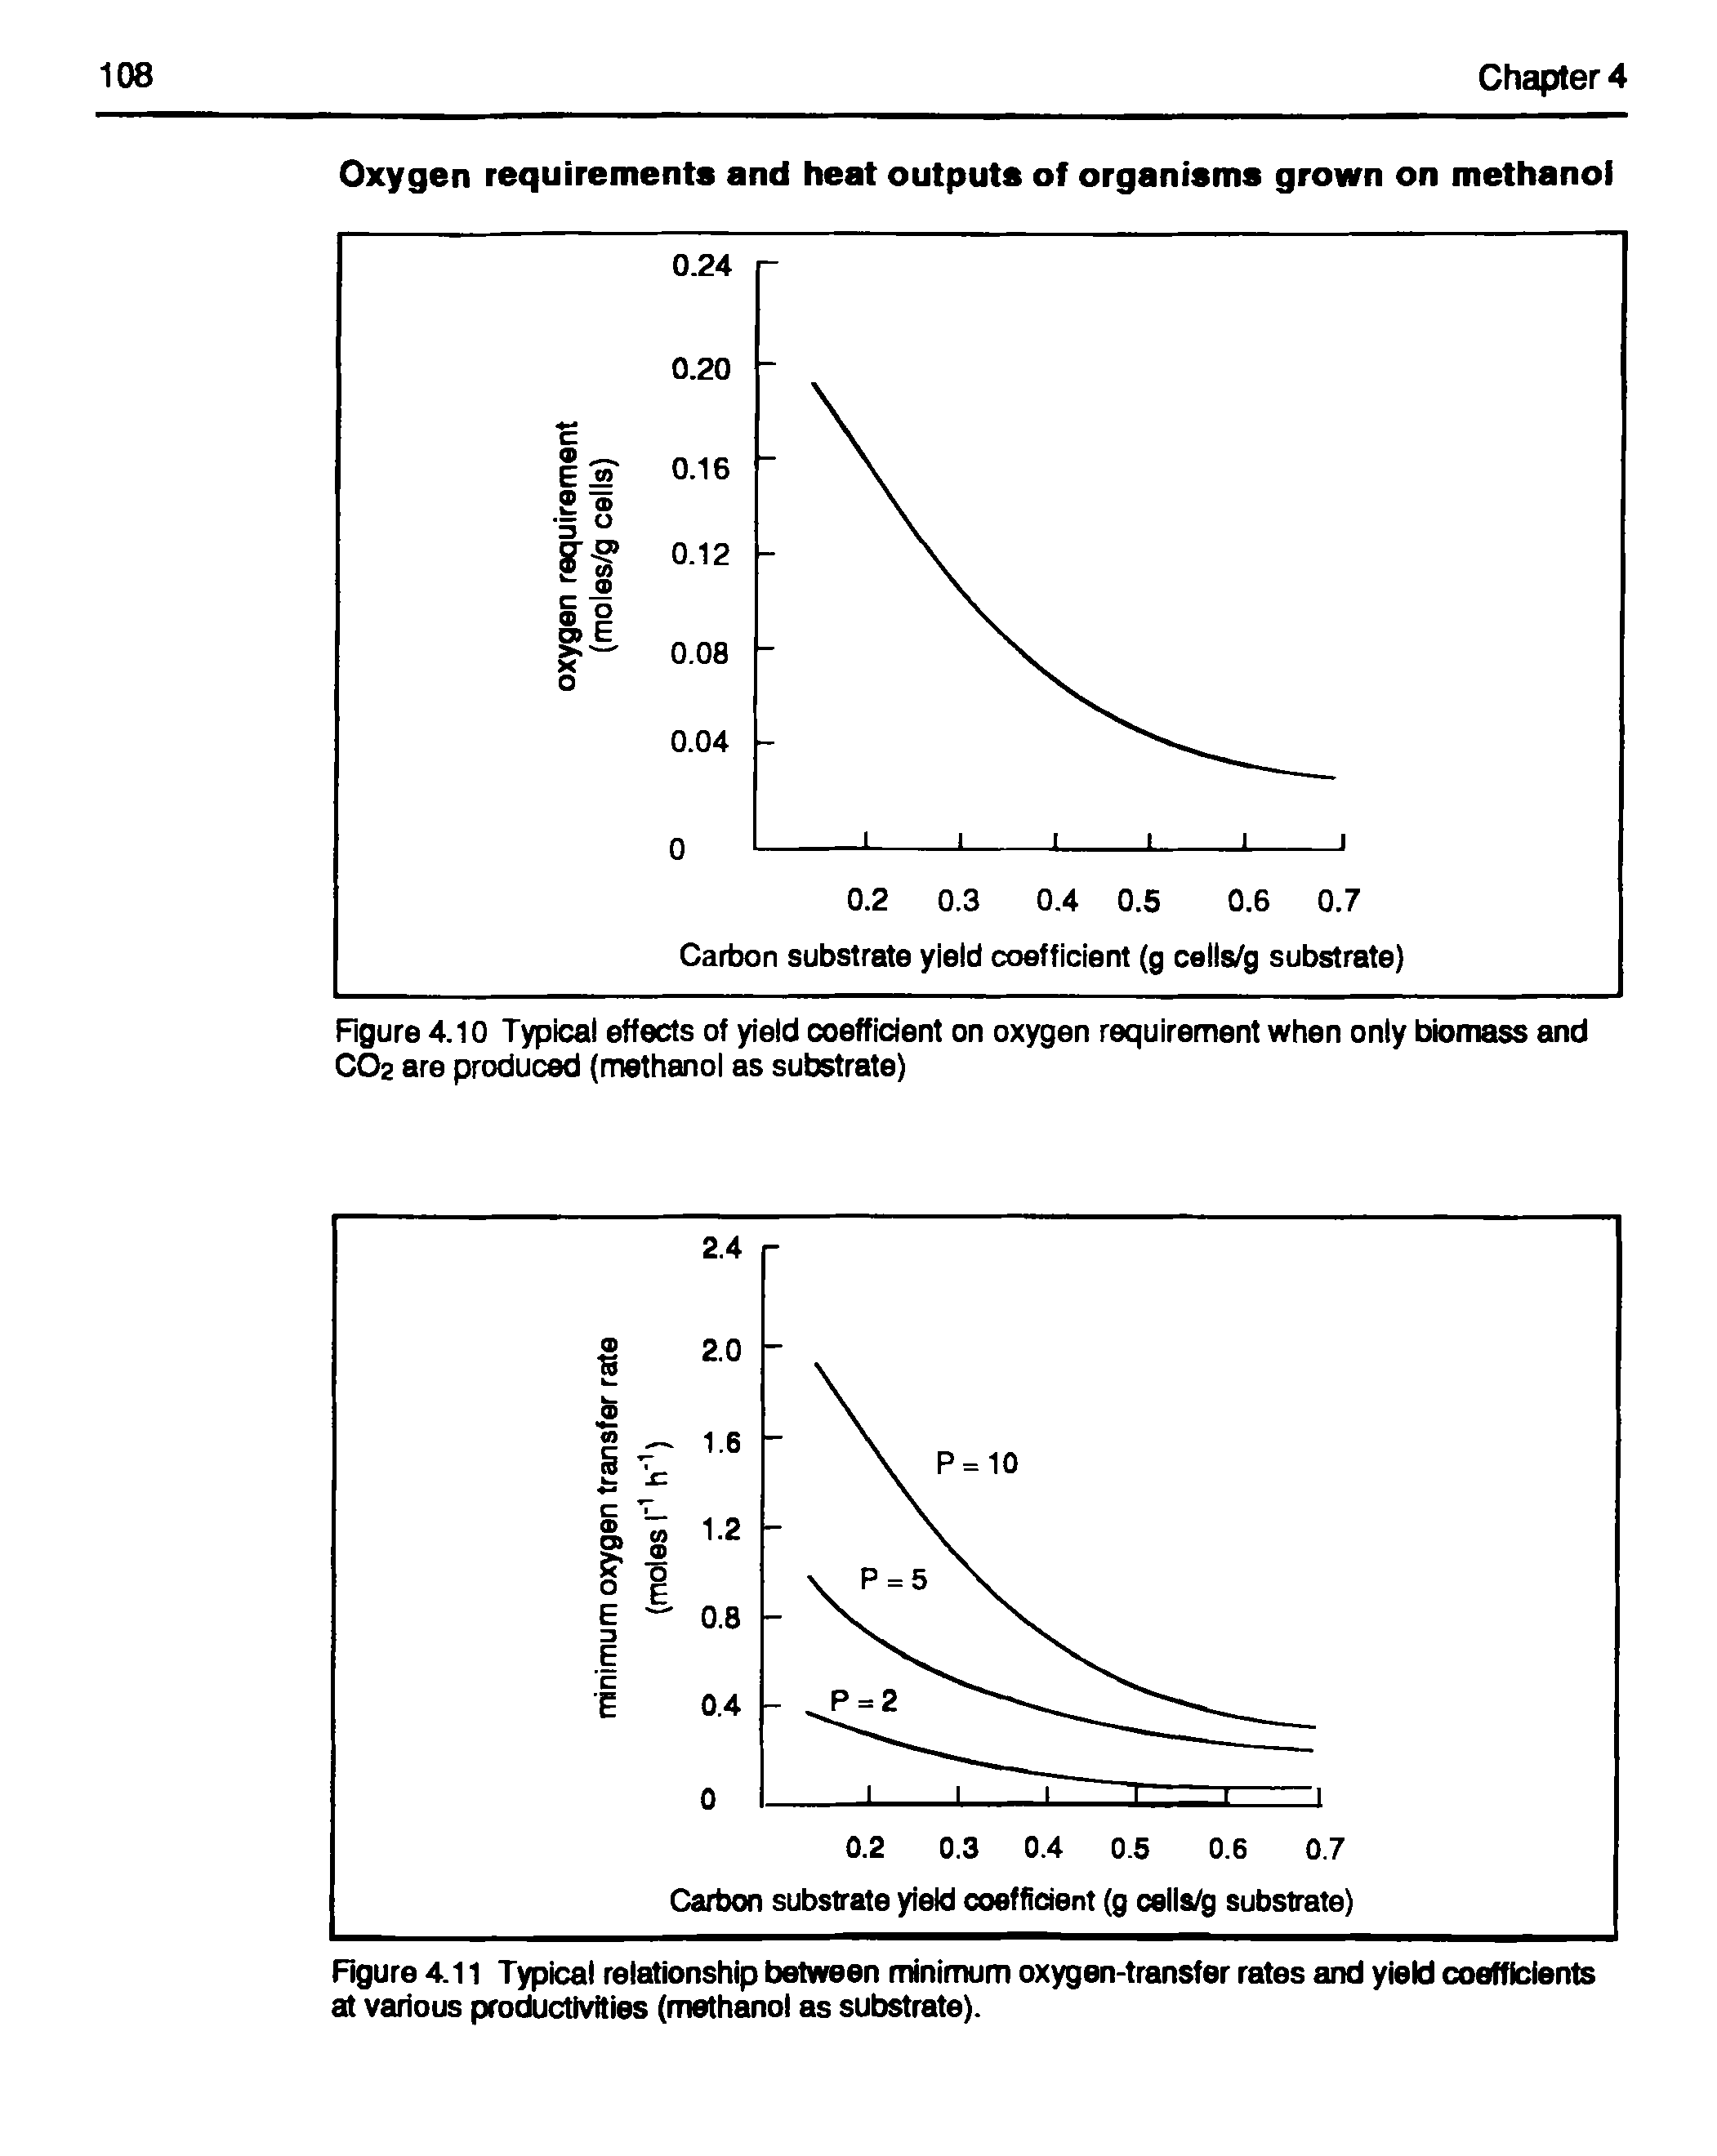 Figure 4.10 Typical effects of yield coefficient on oxygen requirement when only biomass and CO2 are produced (methanol as substrate)...